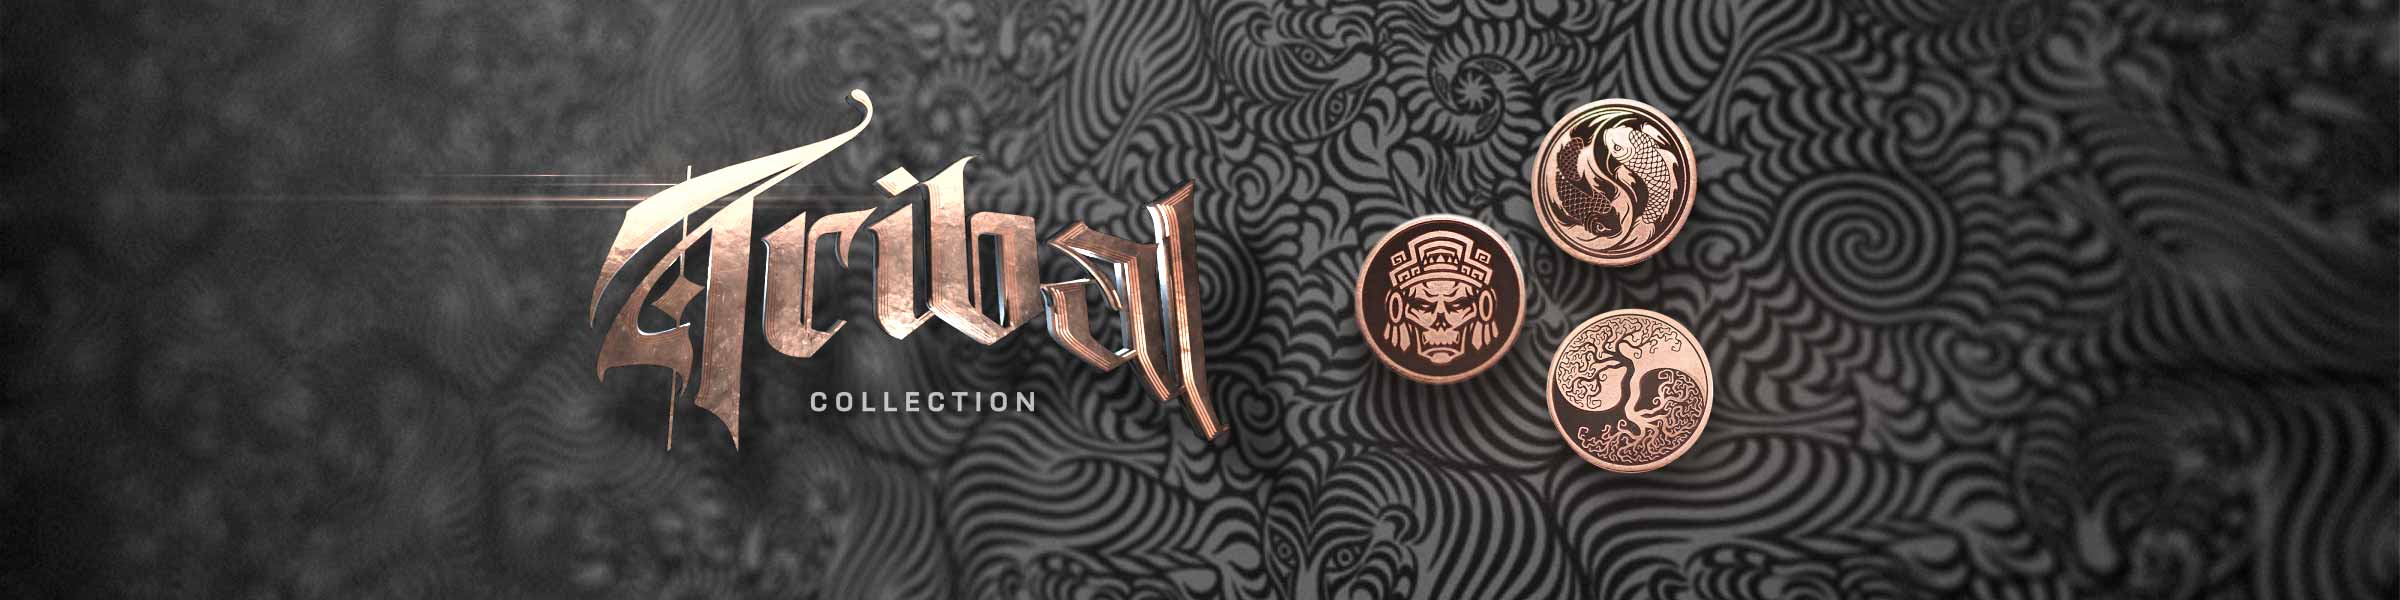 Tribal Copper Pin Collection Promotion Hero